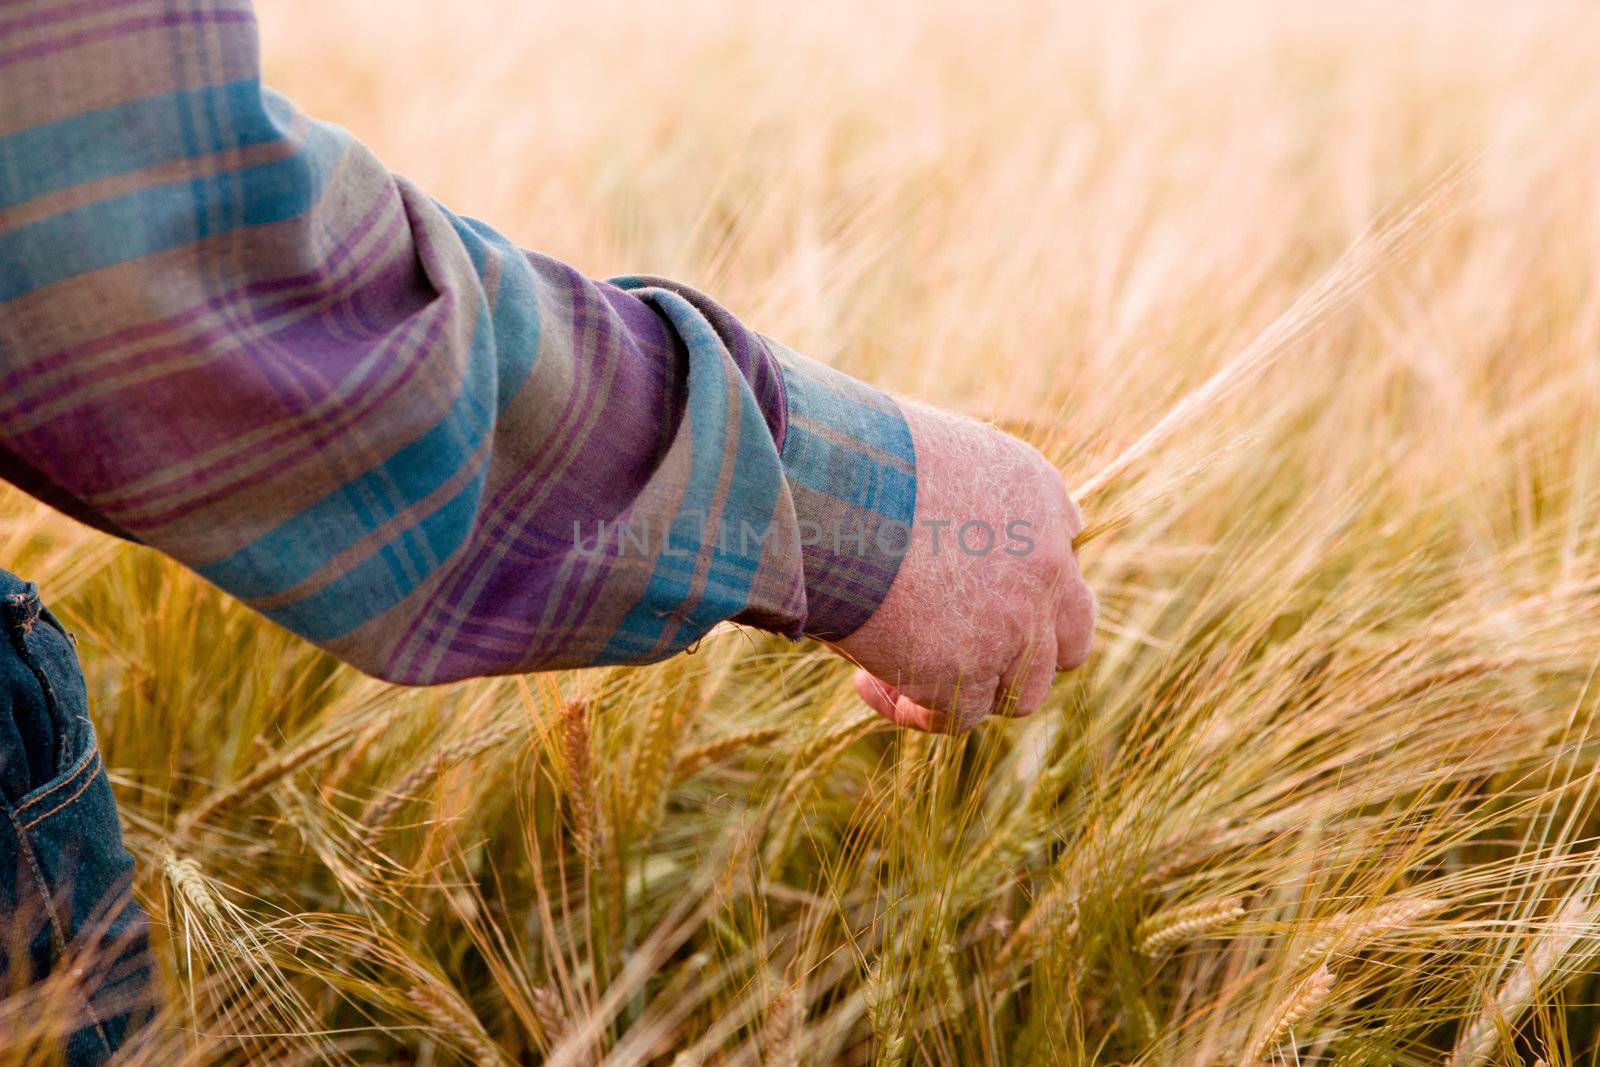 A farmer's hand looking at wheat ready to harvest